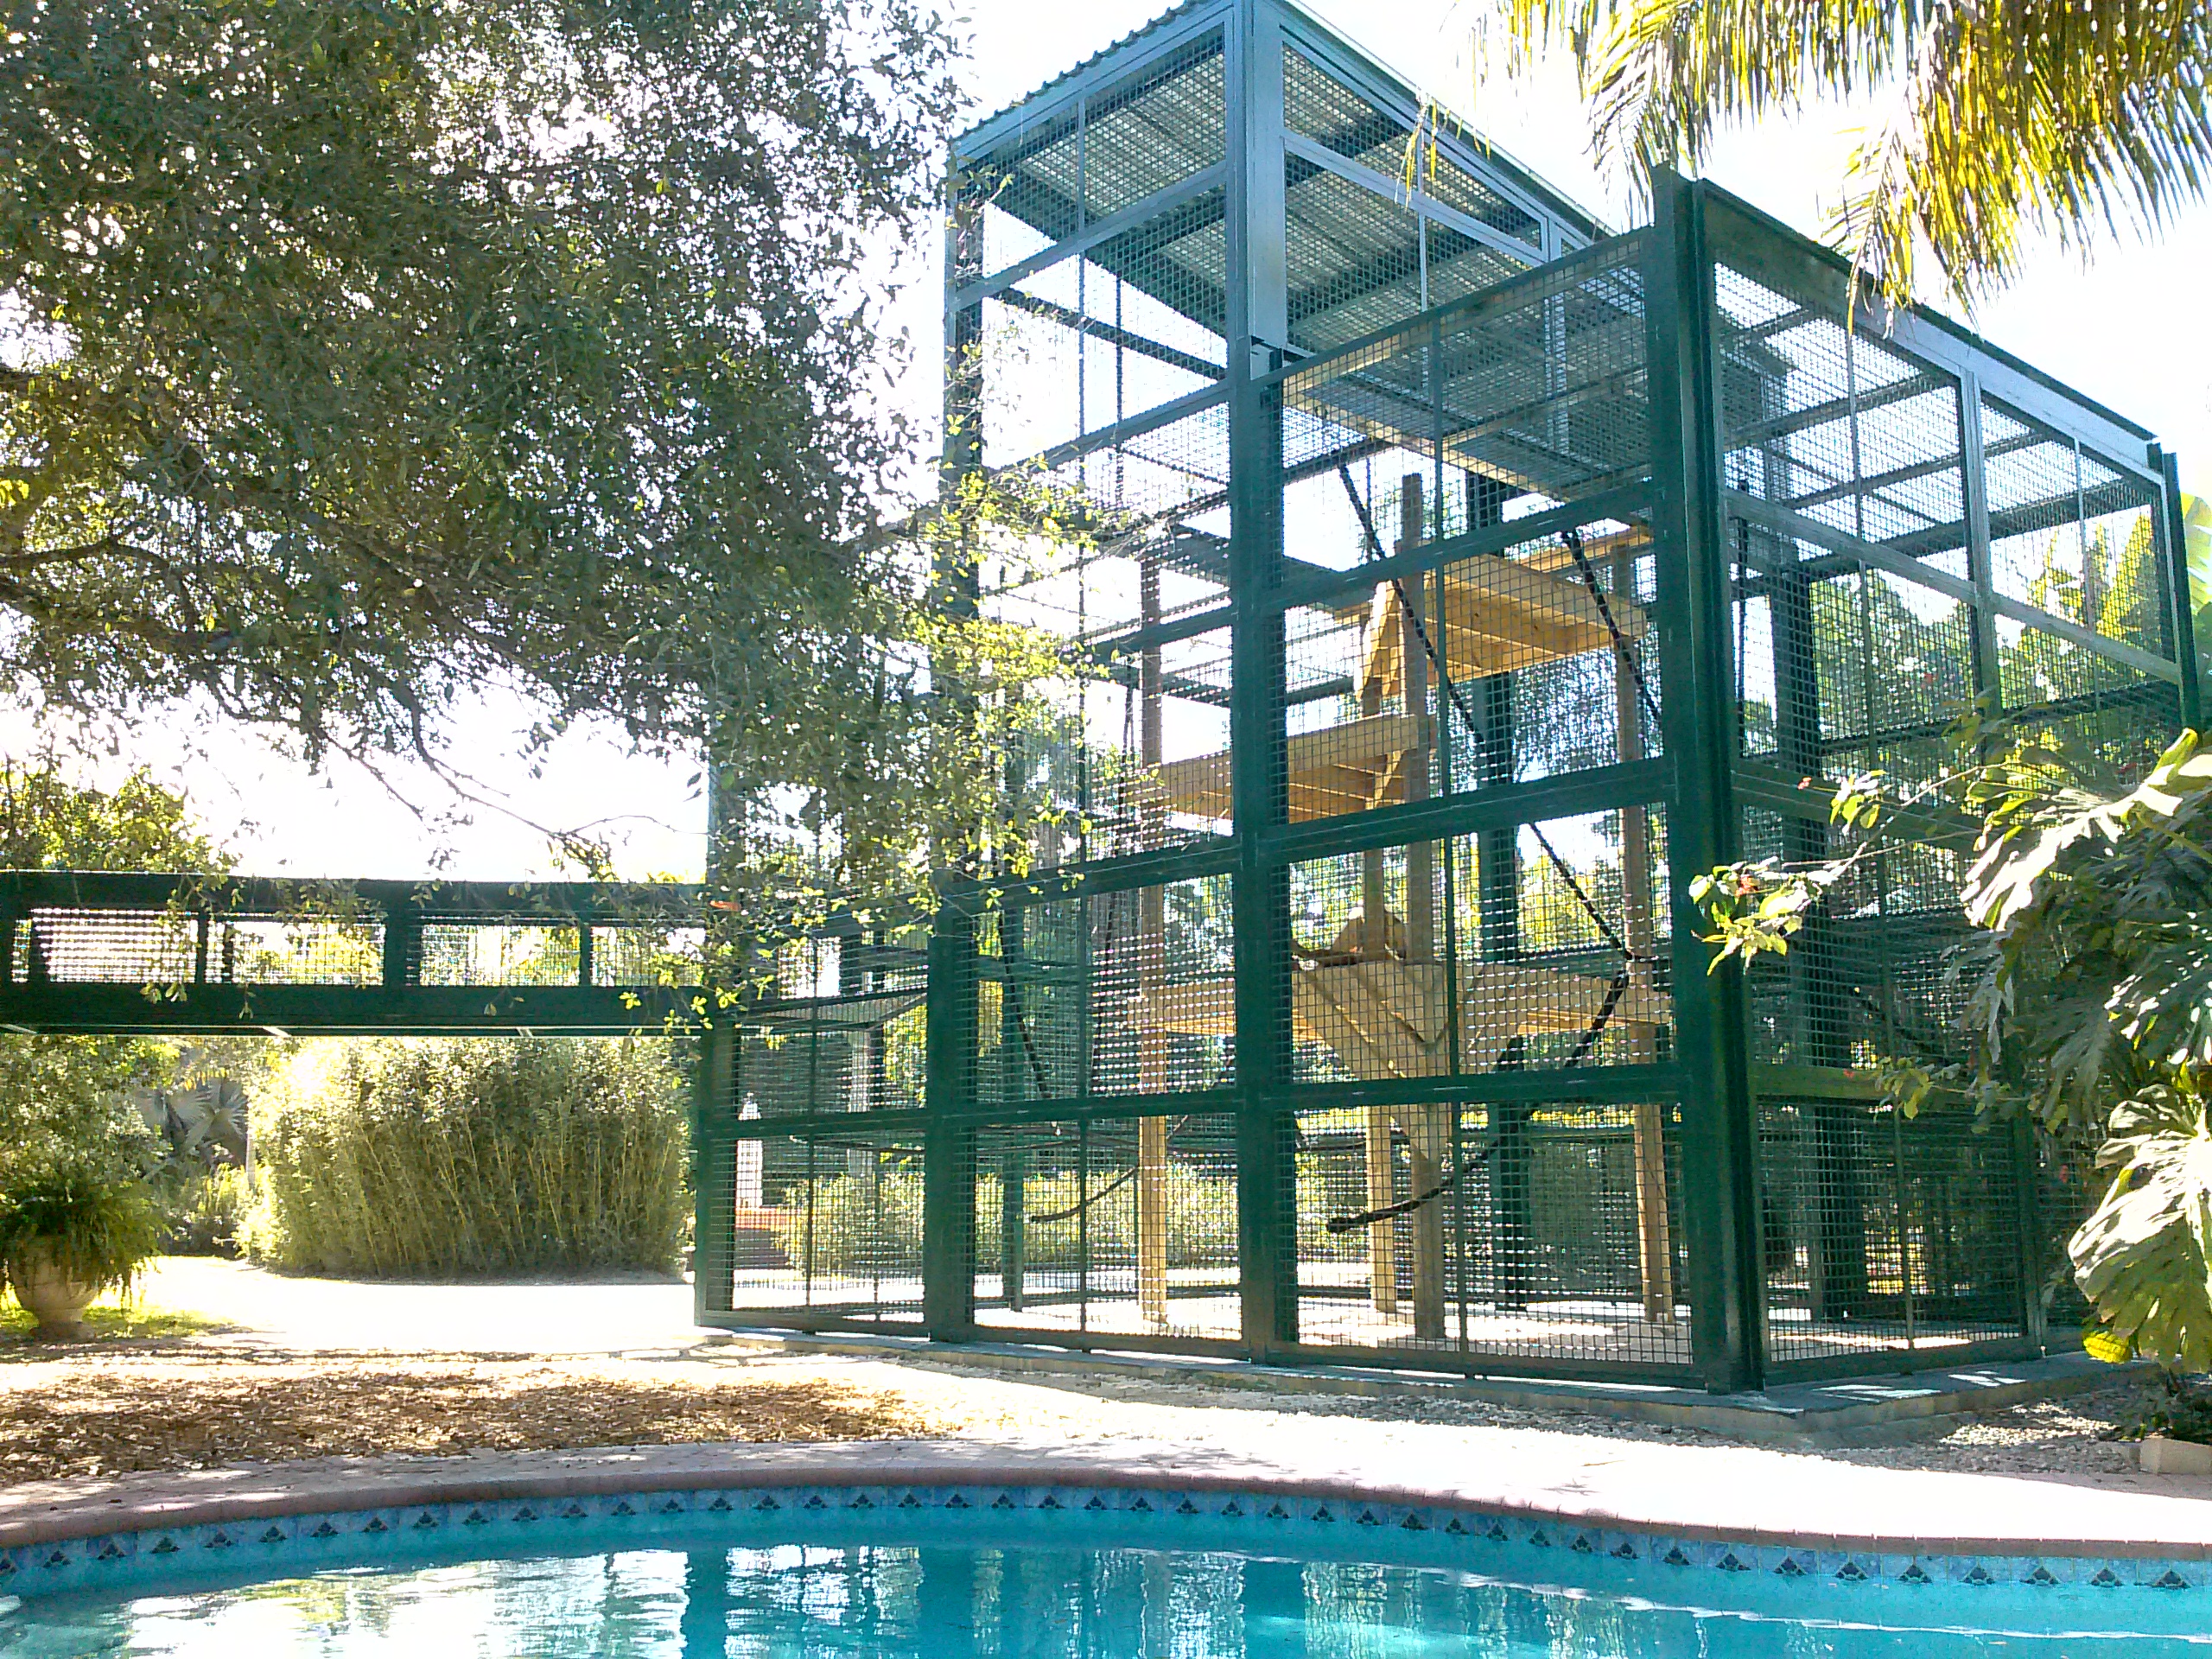 Animal and Wildlife Enclosures, Chimp House, Custom Furniture, Stainless Steel Fabricator in Miami, Structural, Manufacturing, Metal Shop in Miami, Interior Design, Custom Metal Fabrication, Welding Services in Miami, Metal Staircase Handrails, DJ Booth, Store Display, Fixtures, Custom Counters, Steel Monkey Dream Shop Miami, Custom Furniture, Stainless Steel, Aluminum, Steel